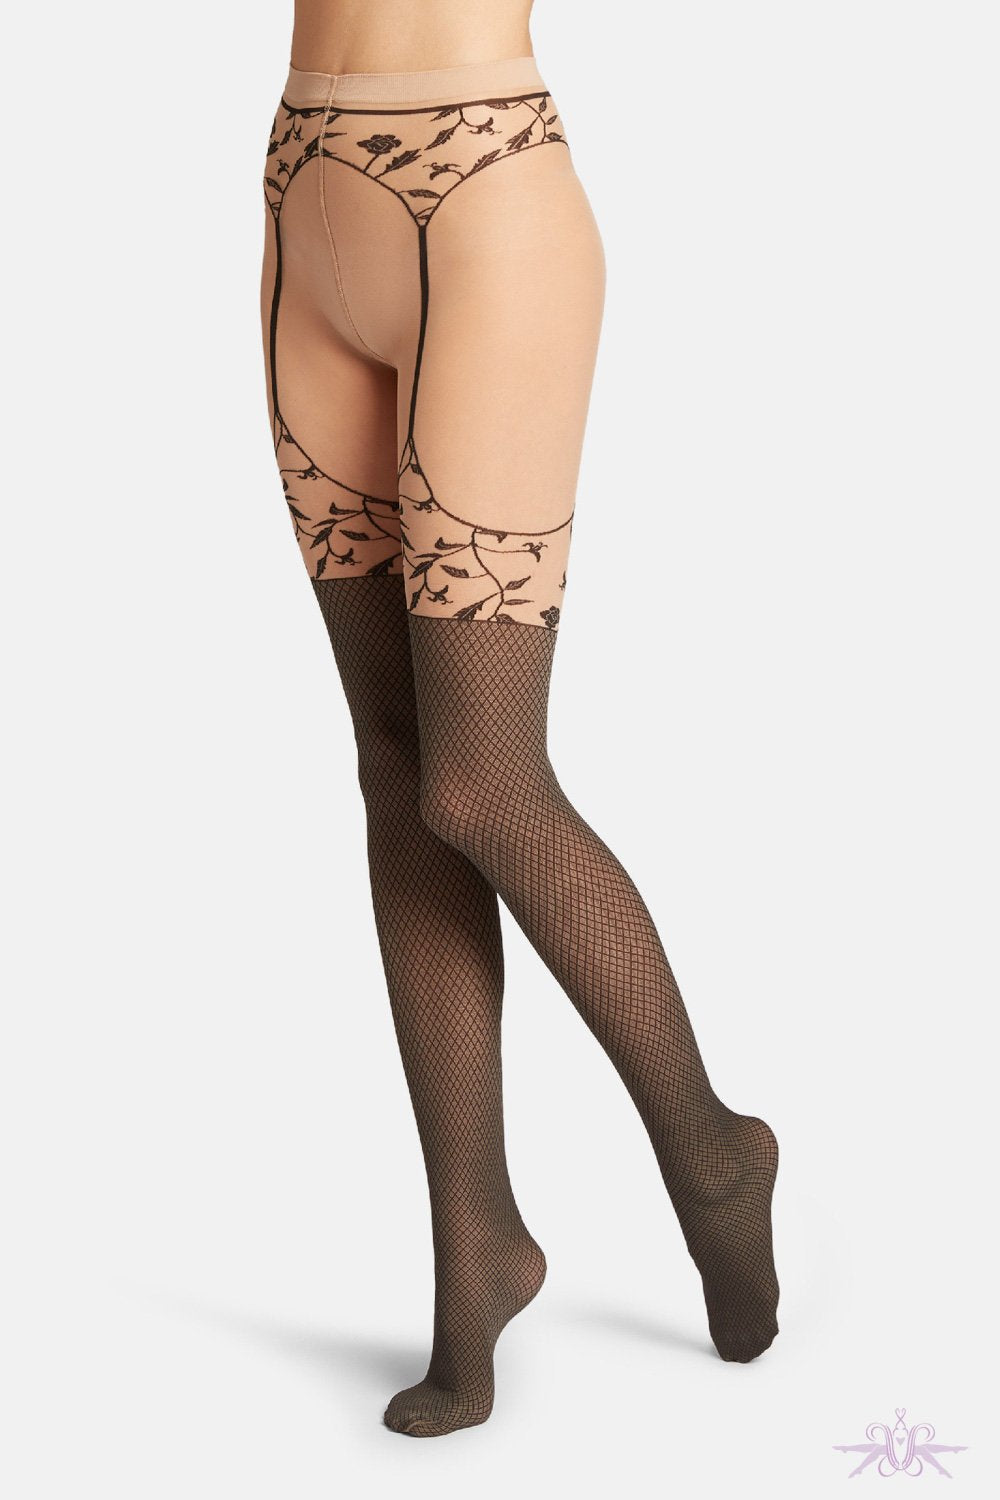 Wolford Flora Tights at the Hosiery Box - The Hosiery Box